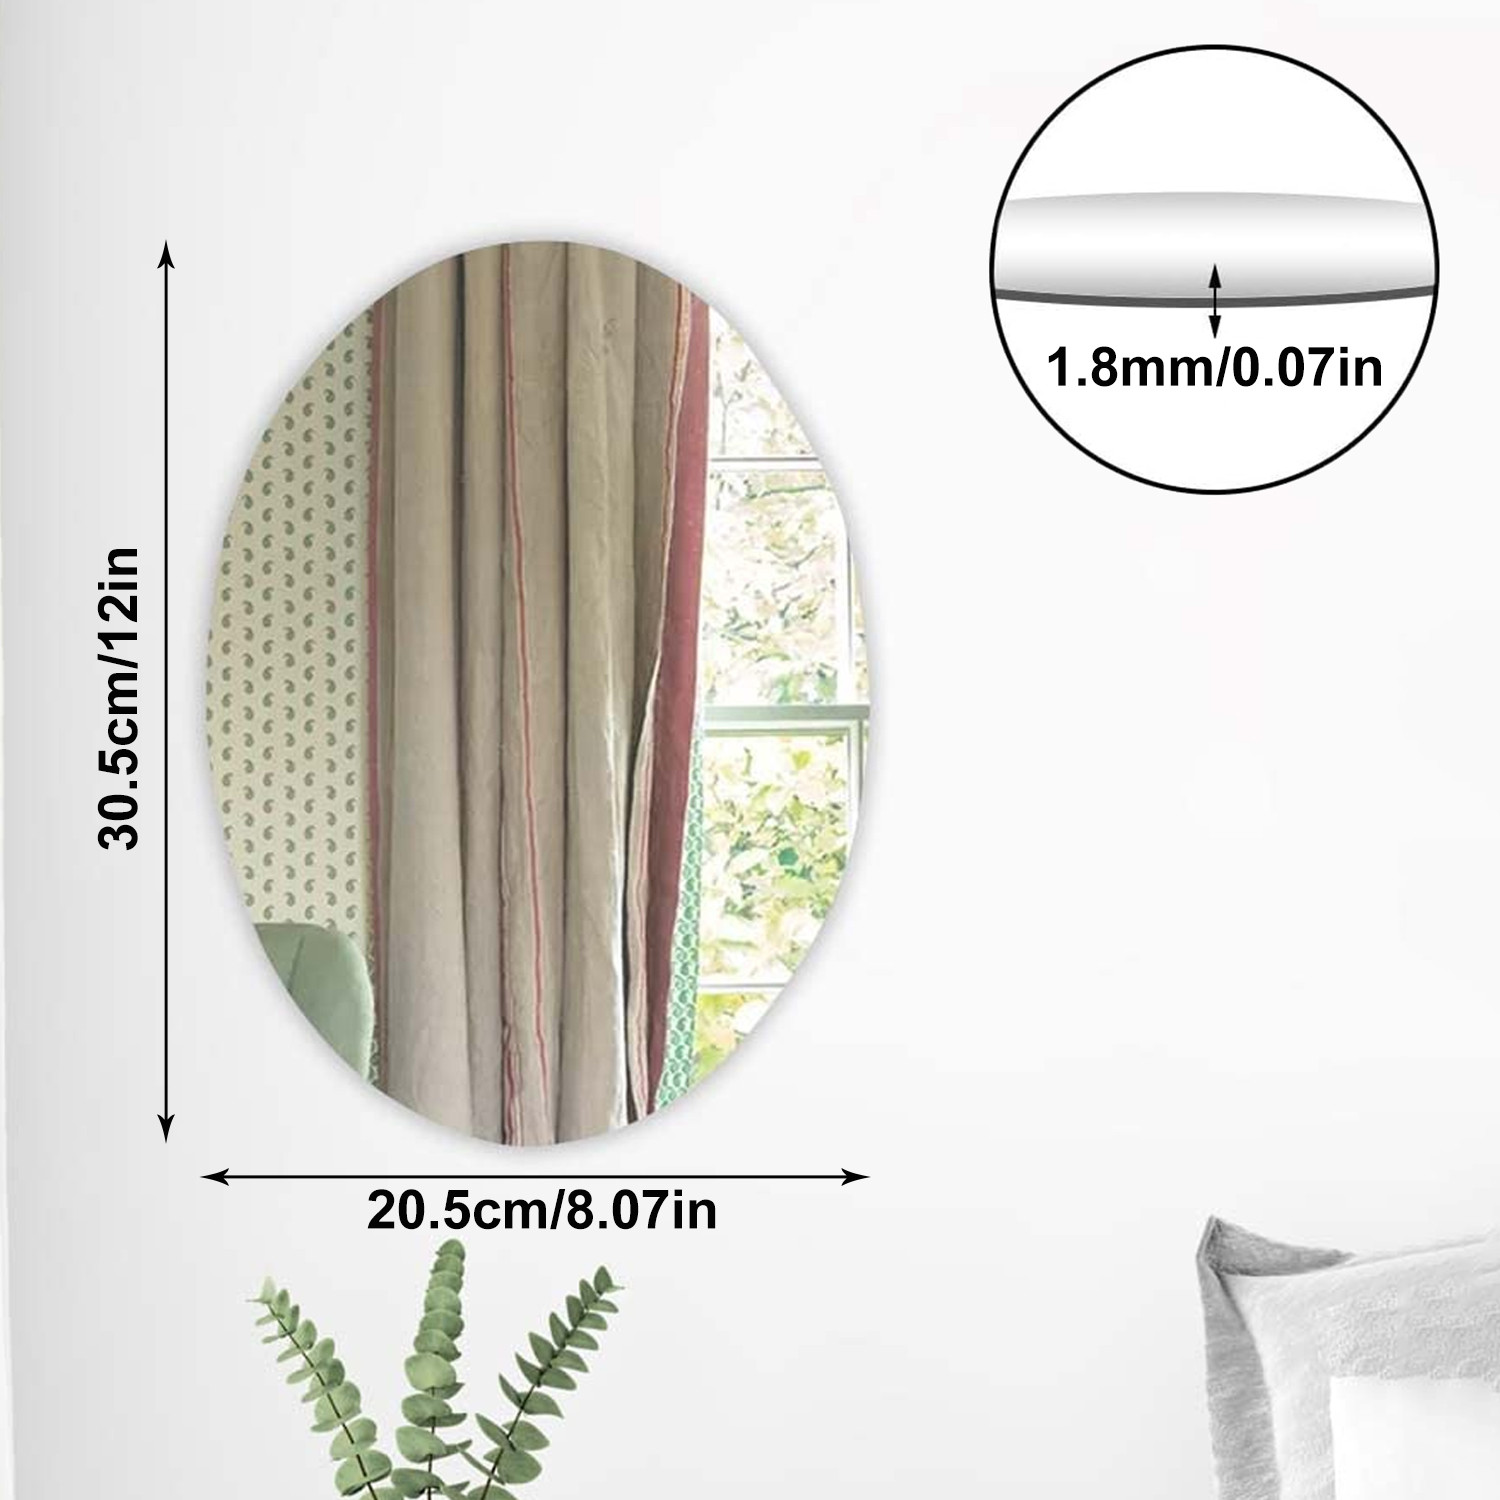 Kuber Industries Self Adhesive Mirror Stickers For Wall|Oval Wall Mirror Stickers|Flexible Mirror For Wall Décor, Living Room|Premium Acrylic Material 